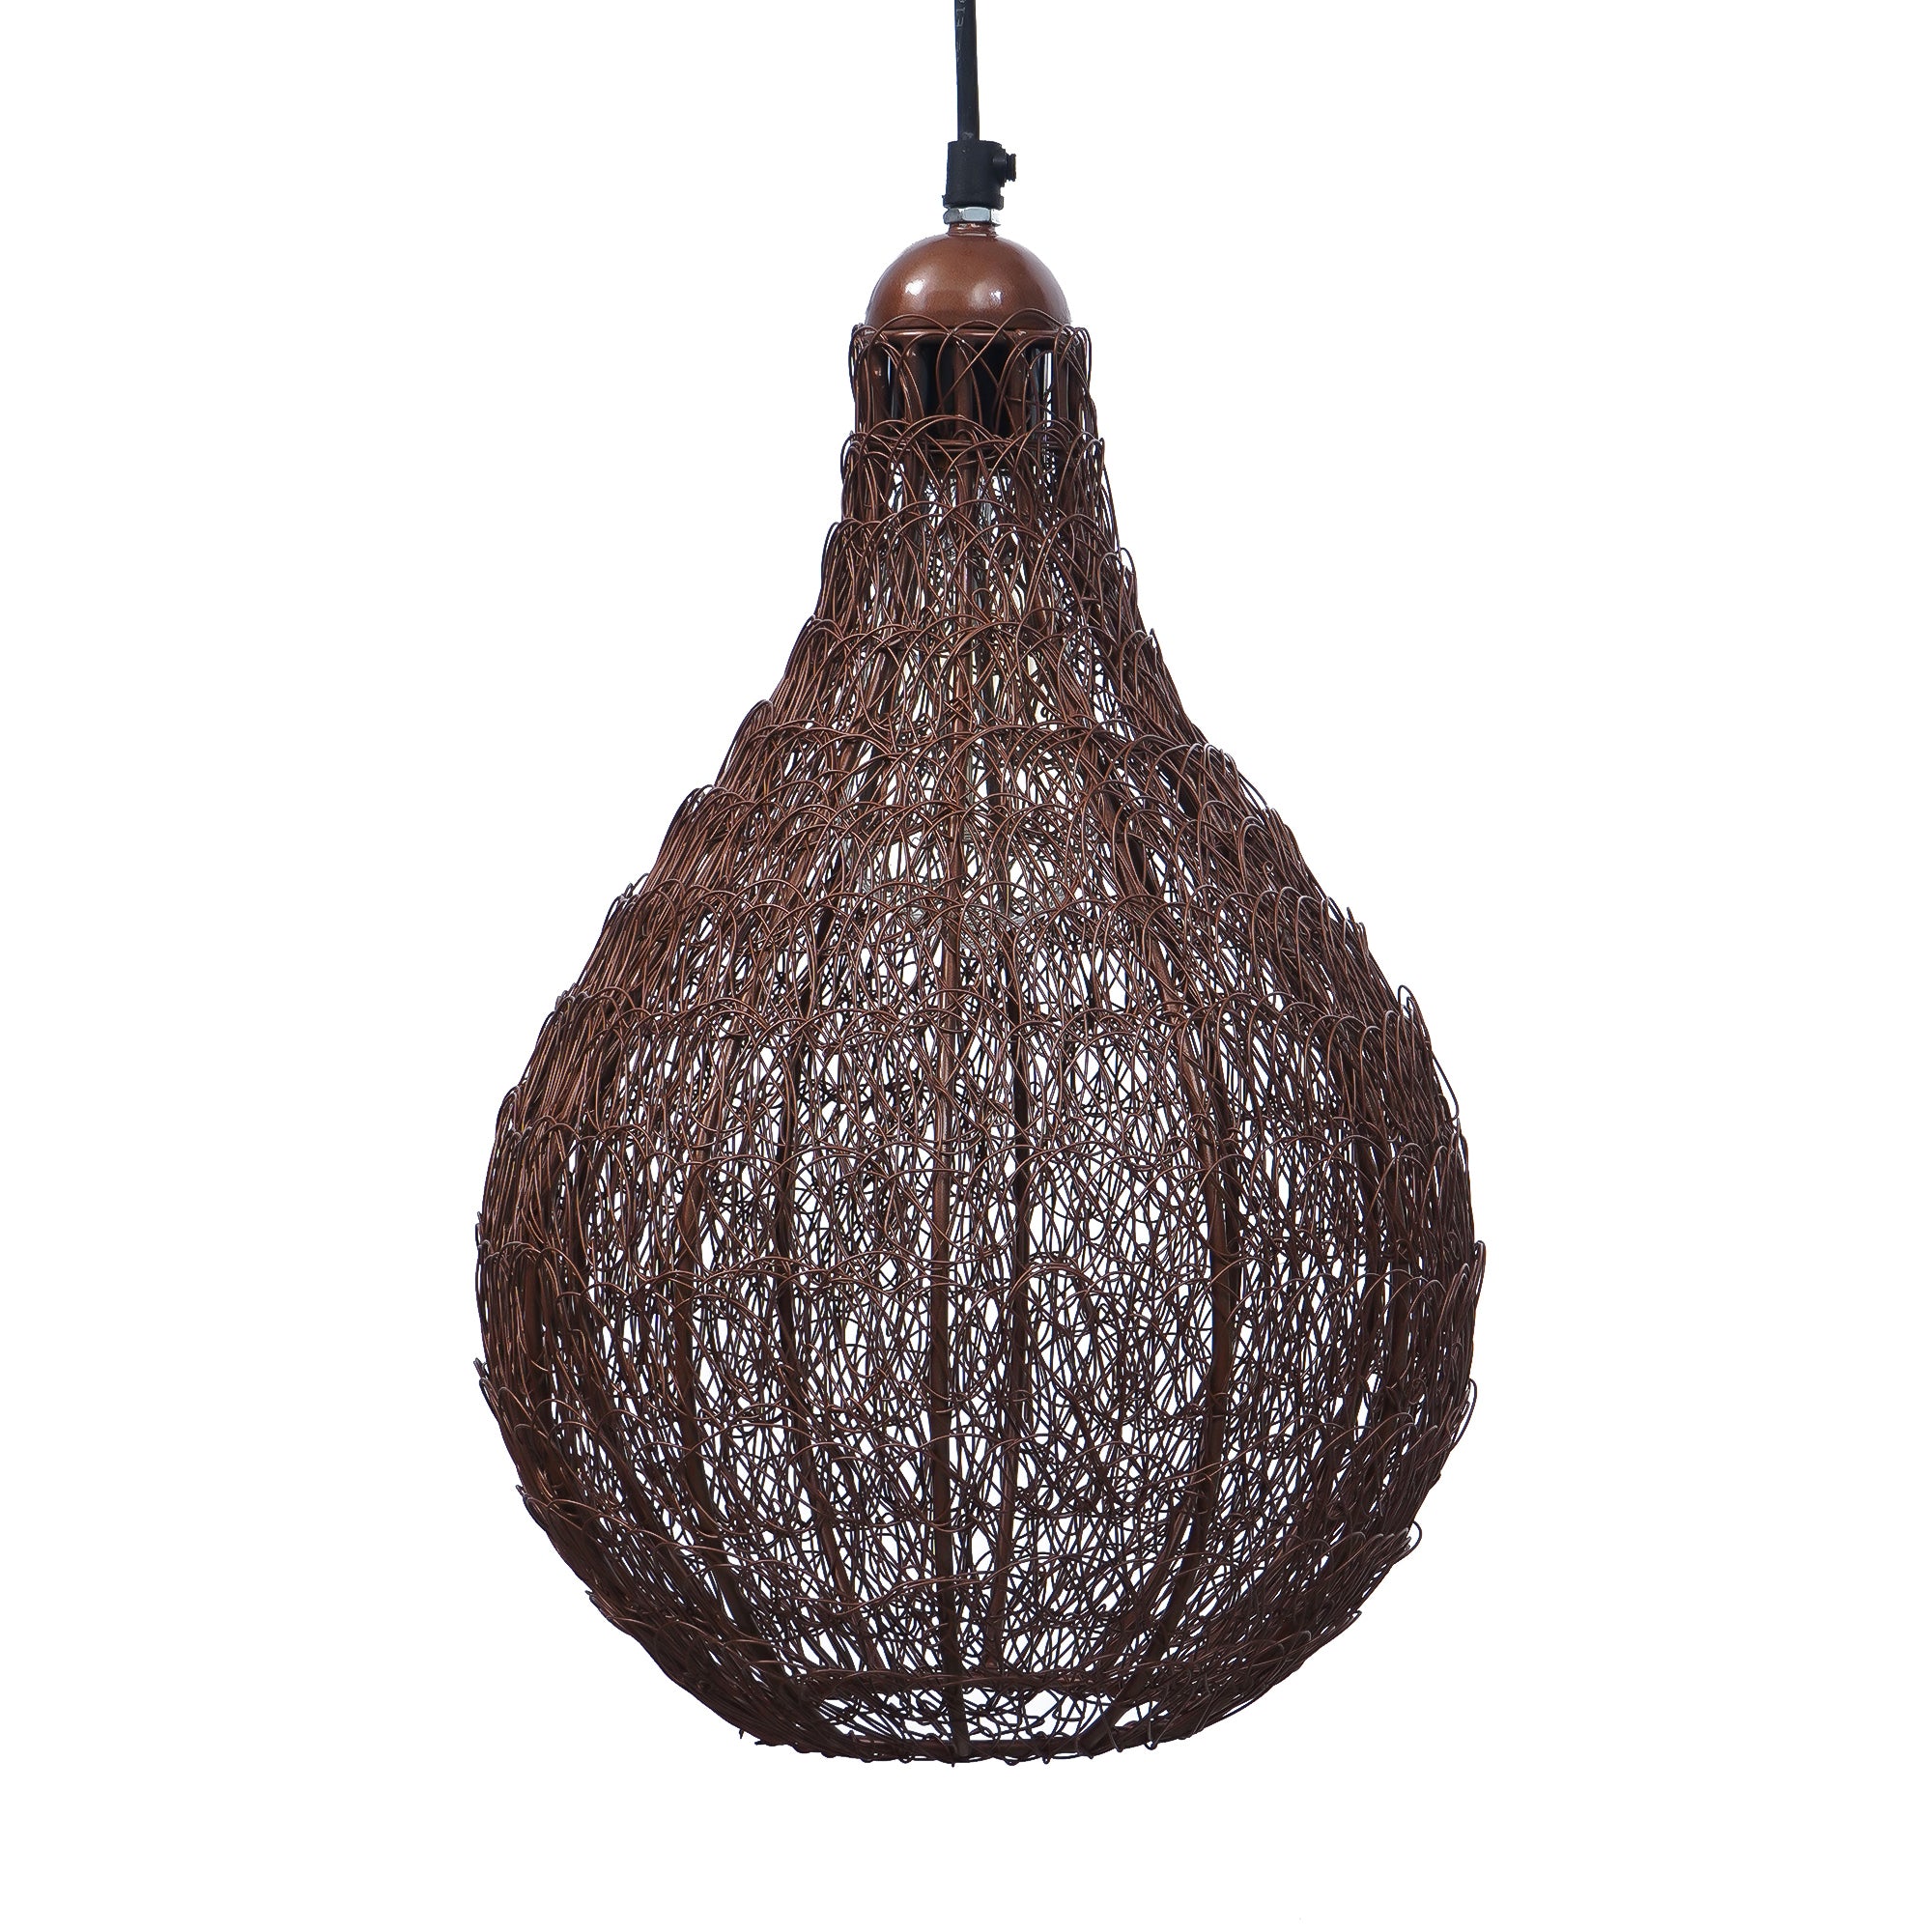 Copper Finish Wire Mesh in Bulb Shape Pendant Light, Ceiling Hanging Lamp for Home/Office Decoration 2